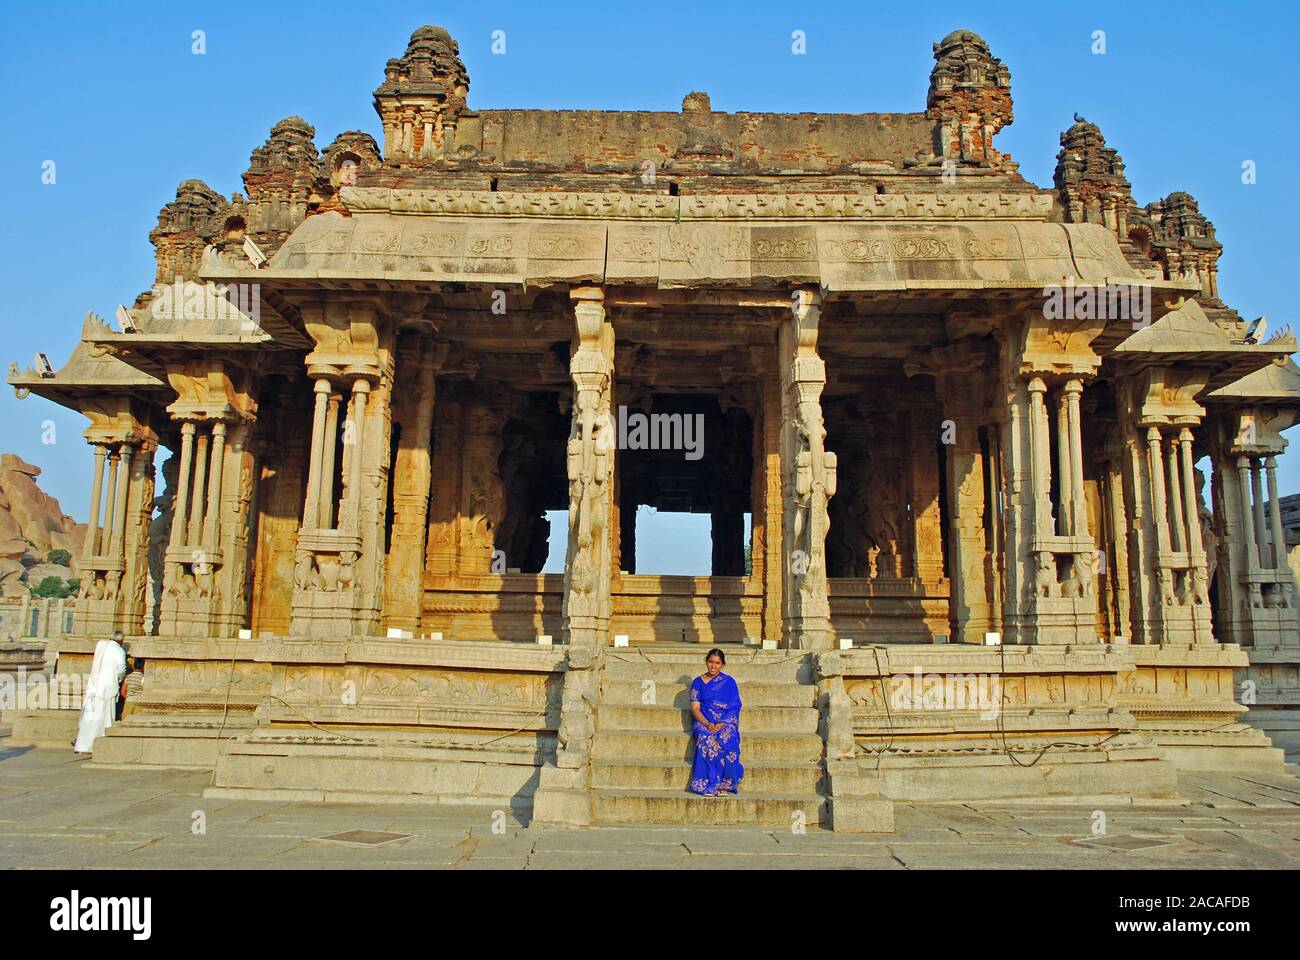 Unesco World Heritage site in Hampi Vitthala temple in South India Stock Photo